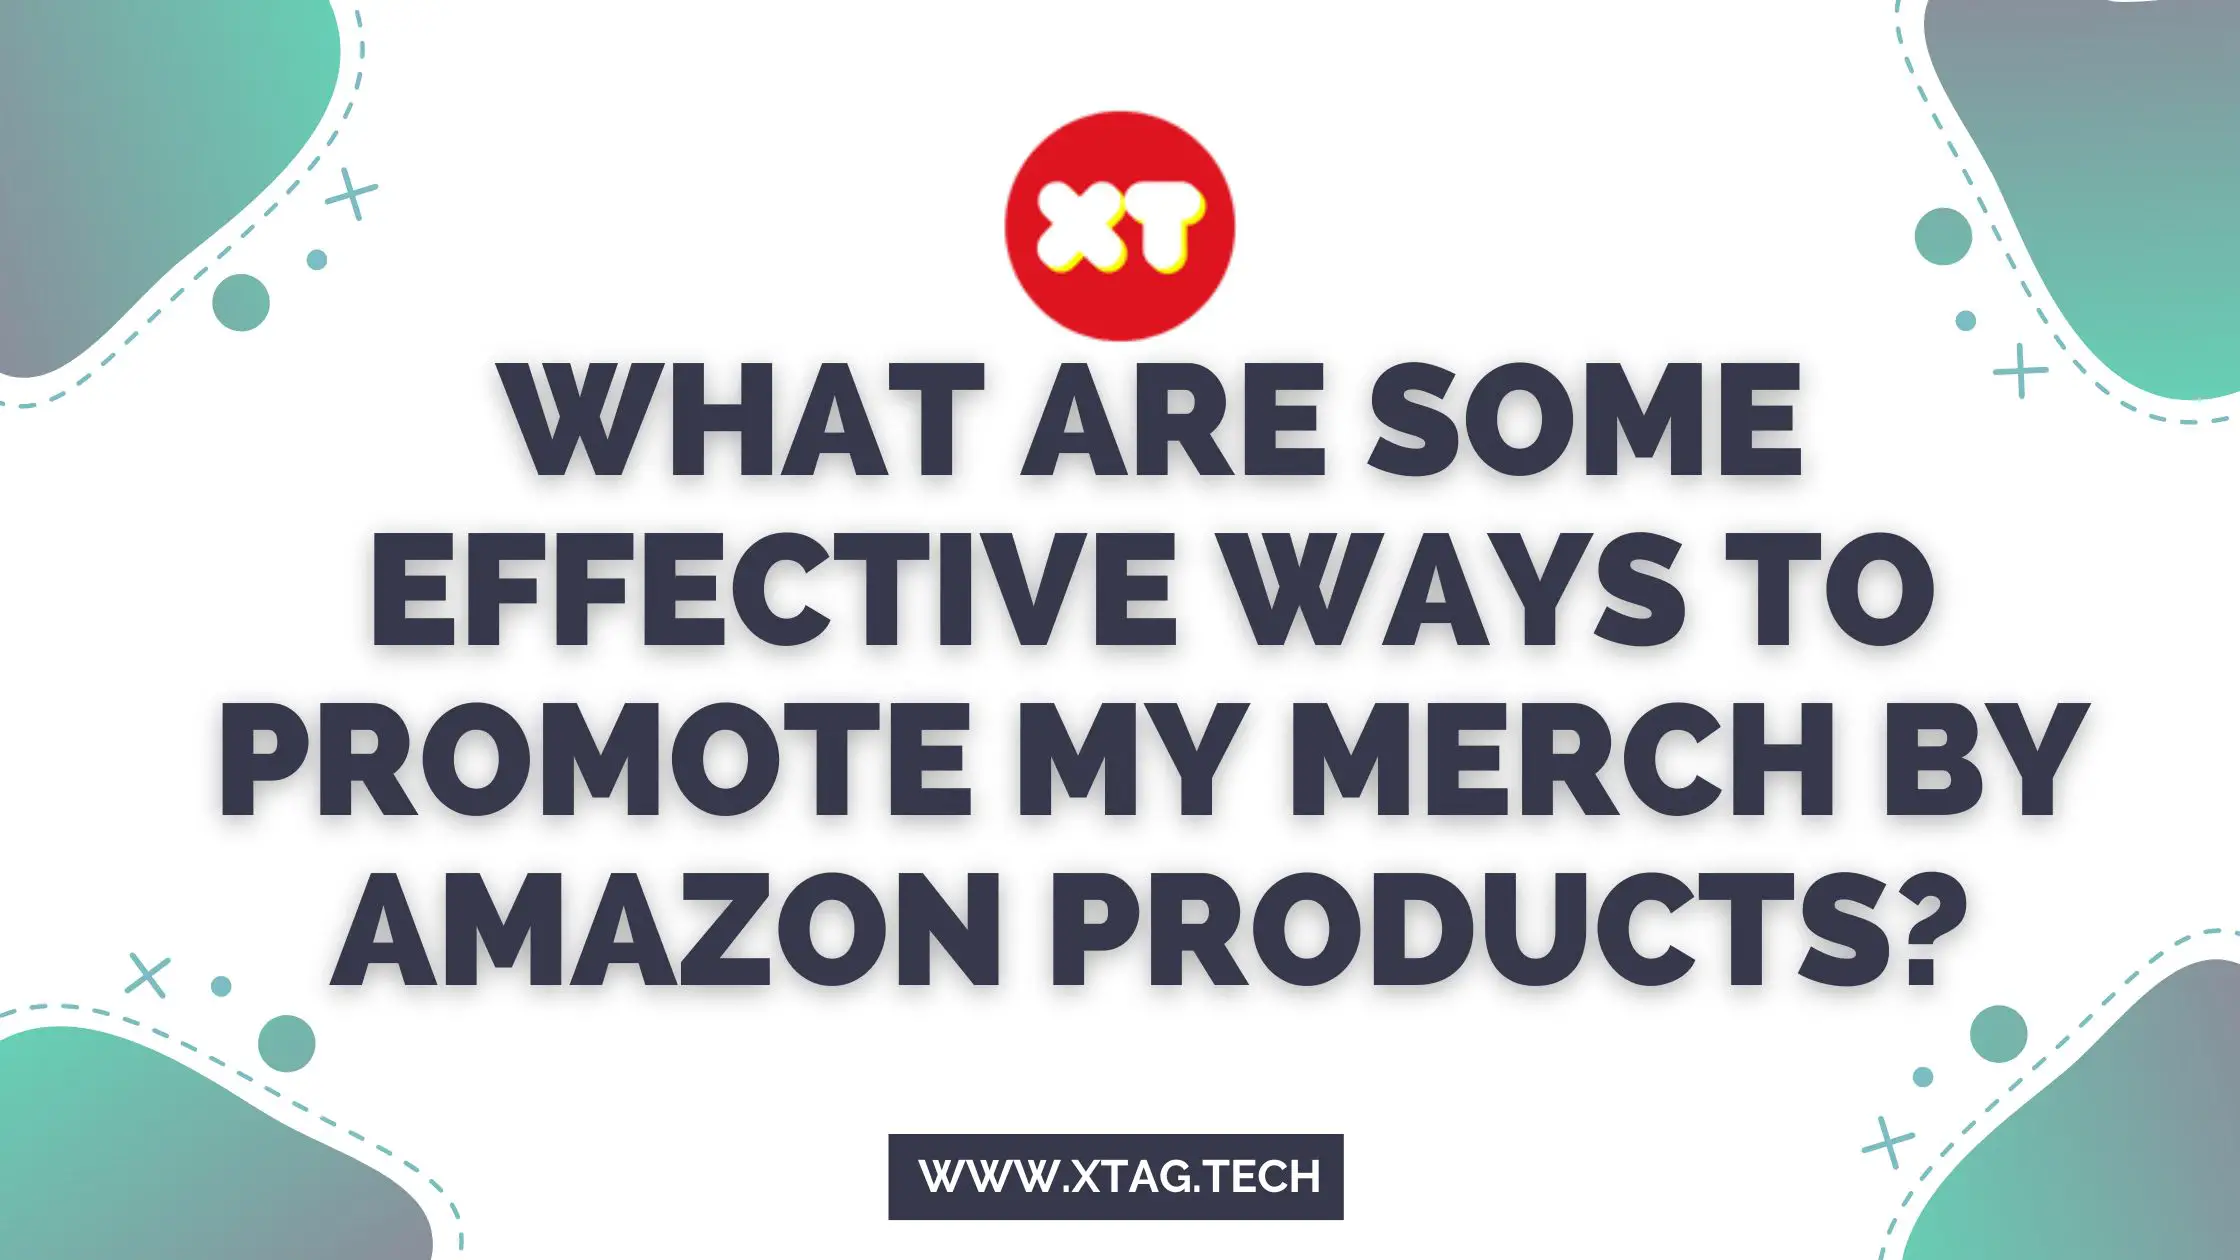 What Are Some Effective Ways To Promote My Merch By Amazon Products?